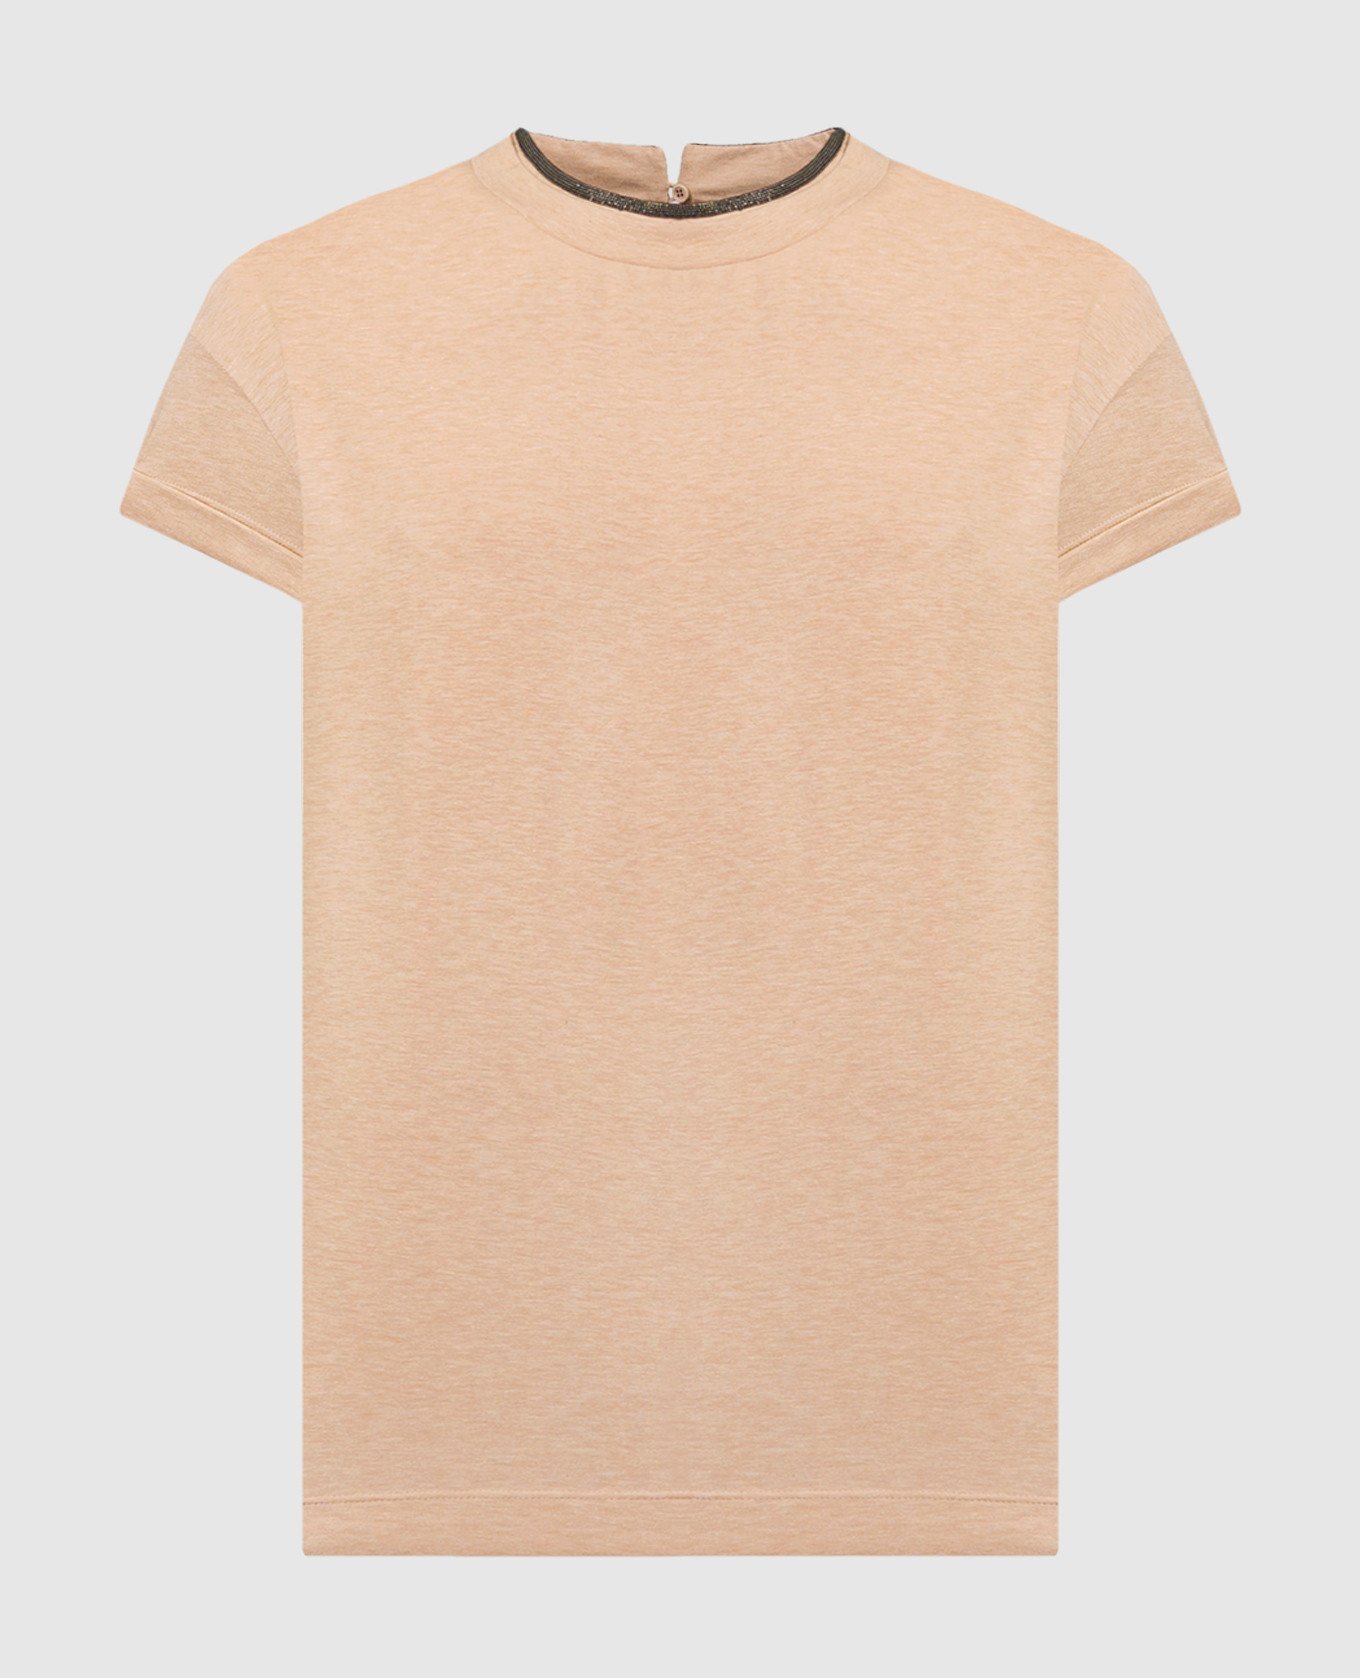 Beige t-shirt with monil chain made of ecolathuni